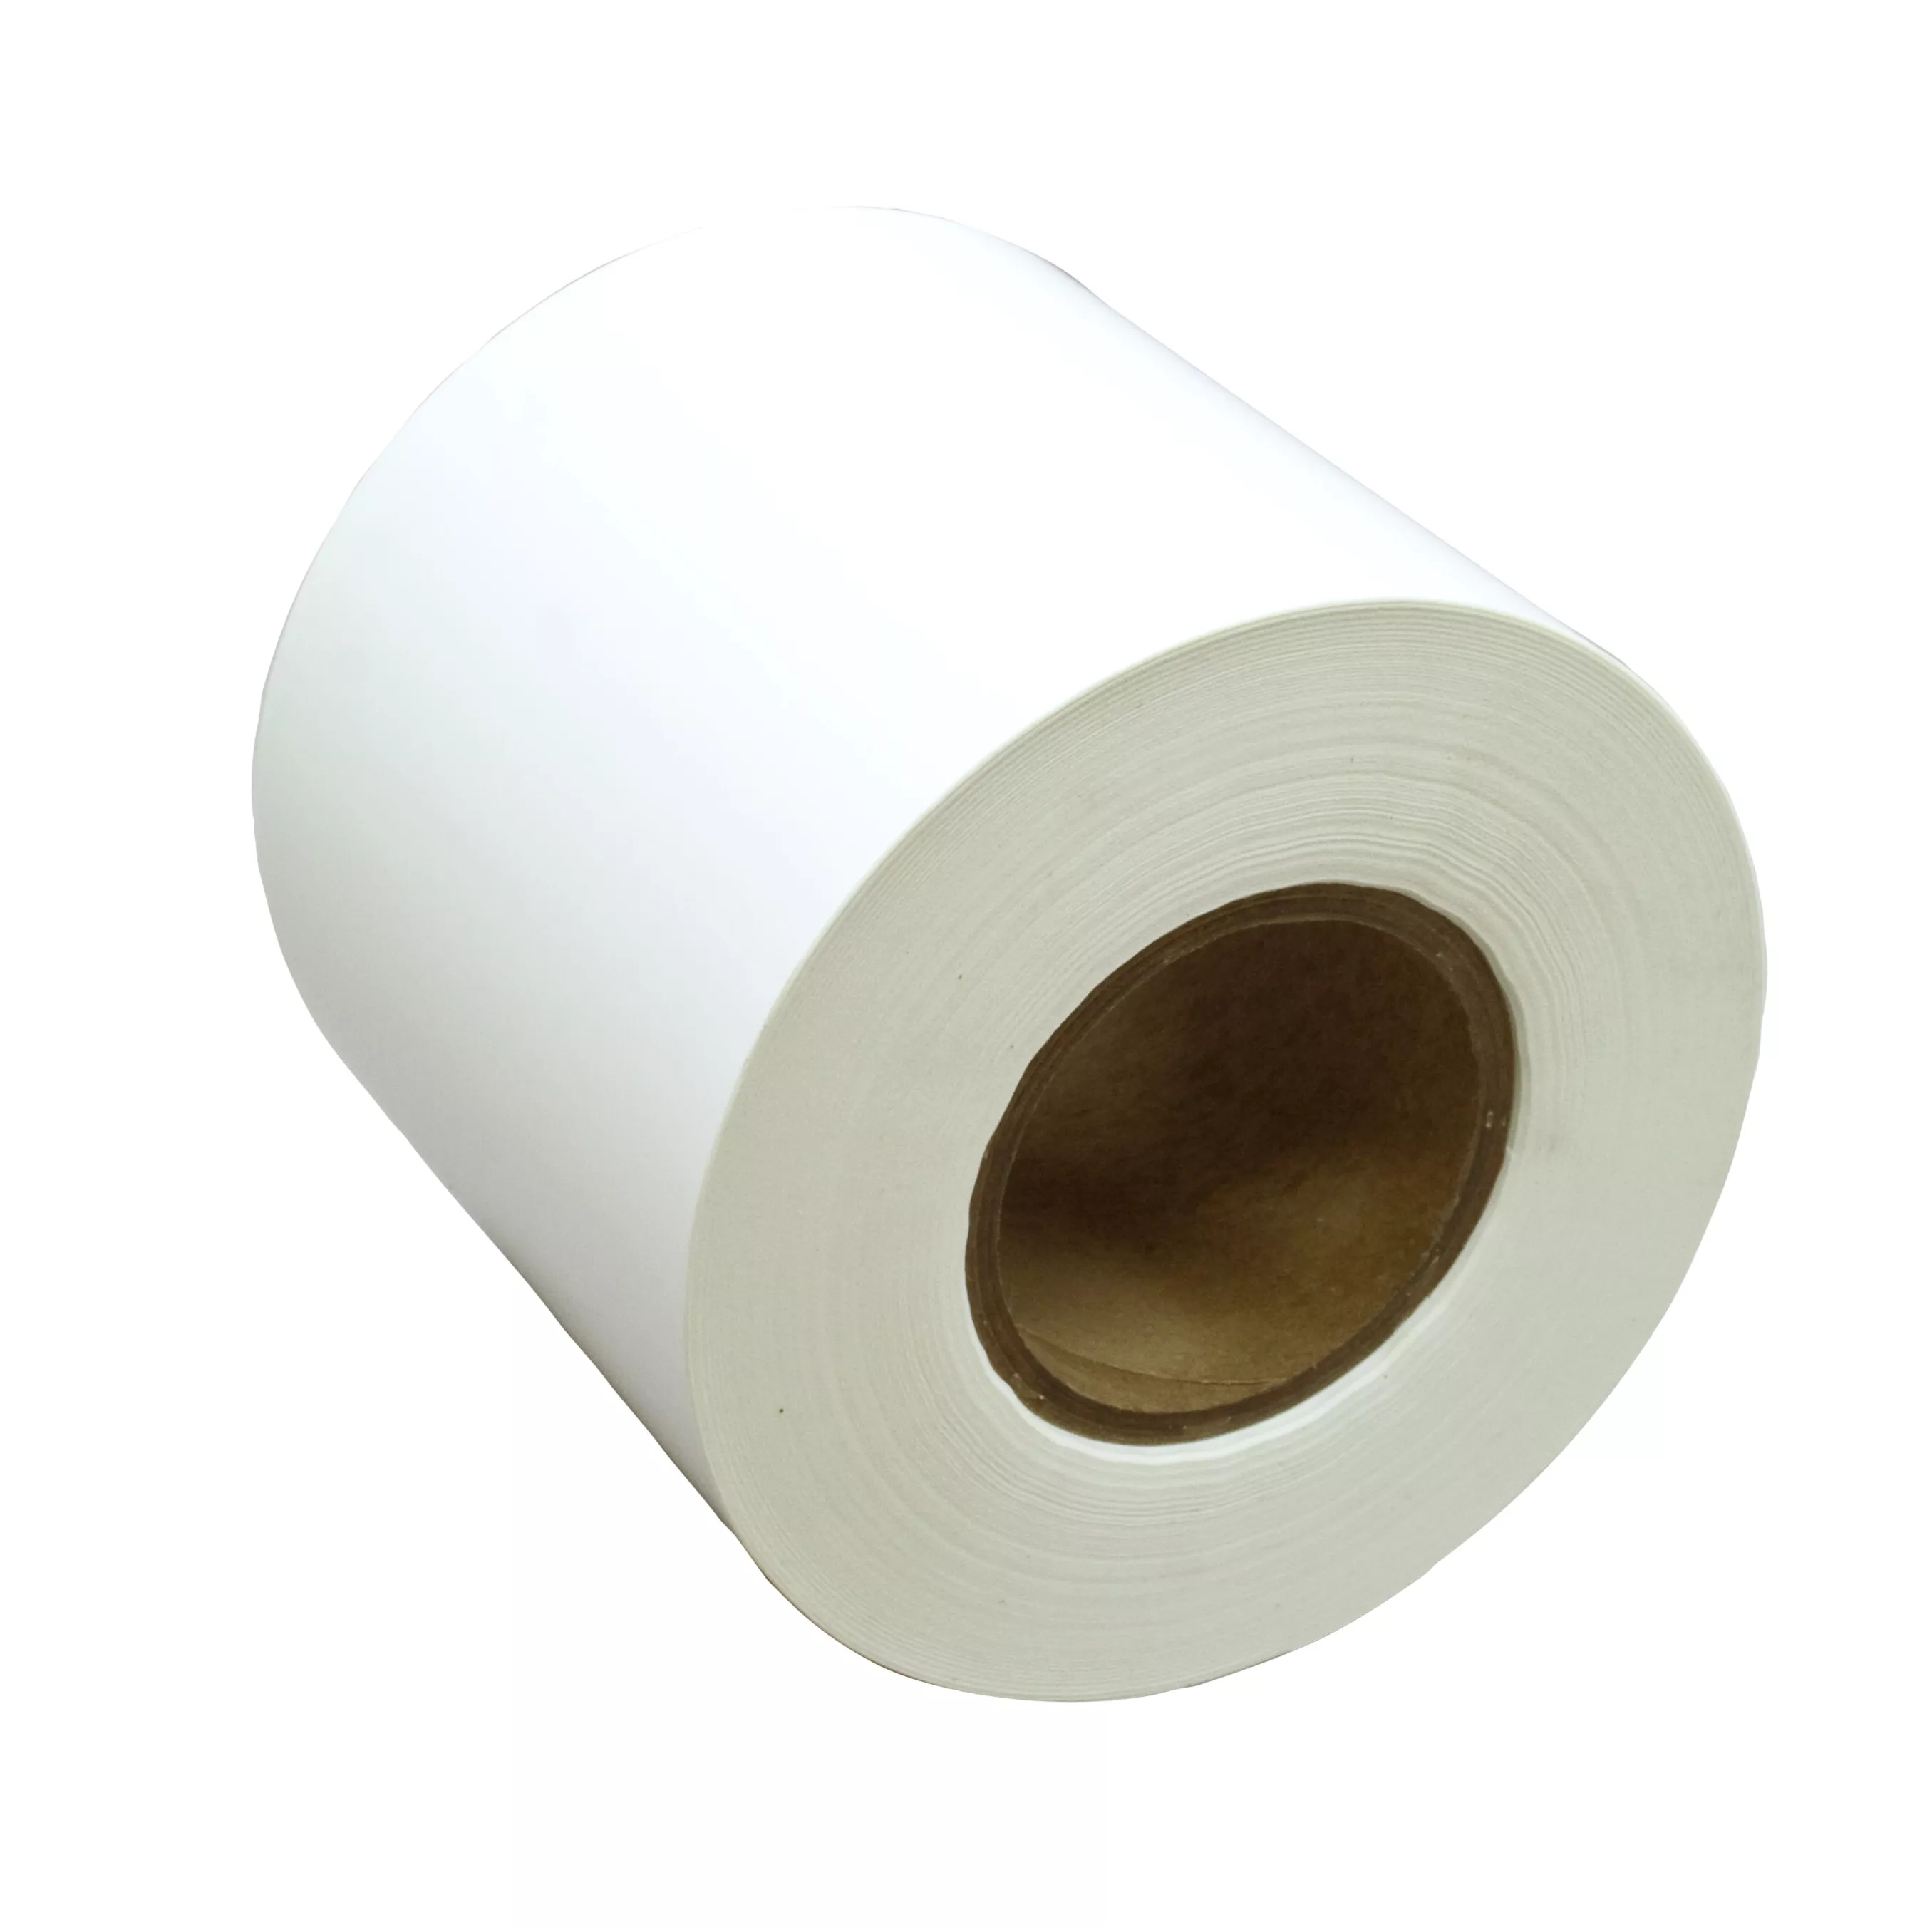 3M™ Thermal Transfer Label Material 7818, Silver Polyester Matte, 4.5 in
x 1668 ft, 1 Roll/Case